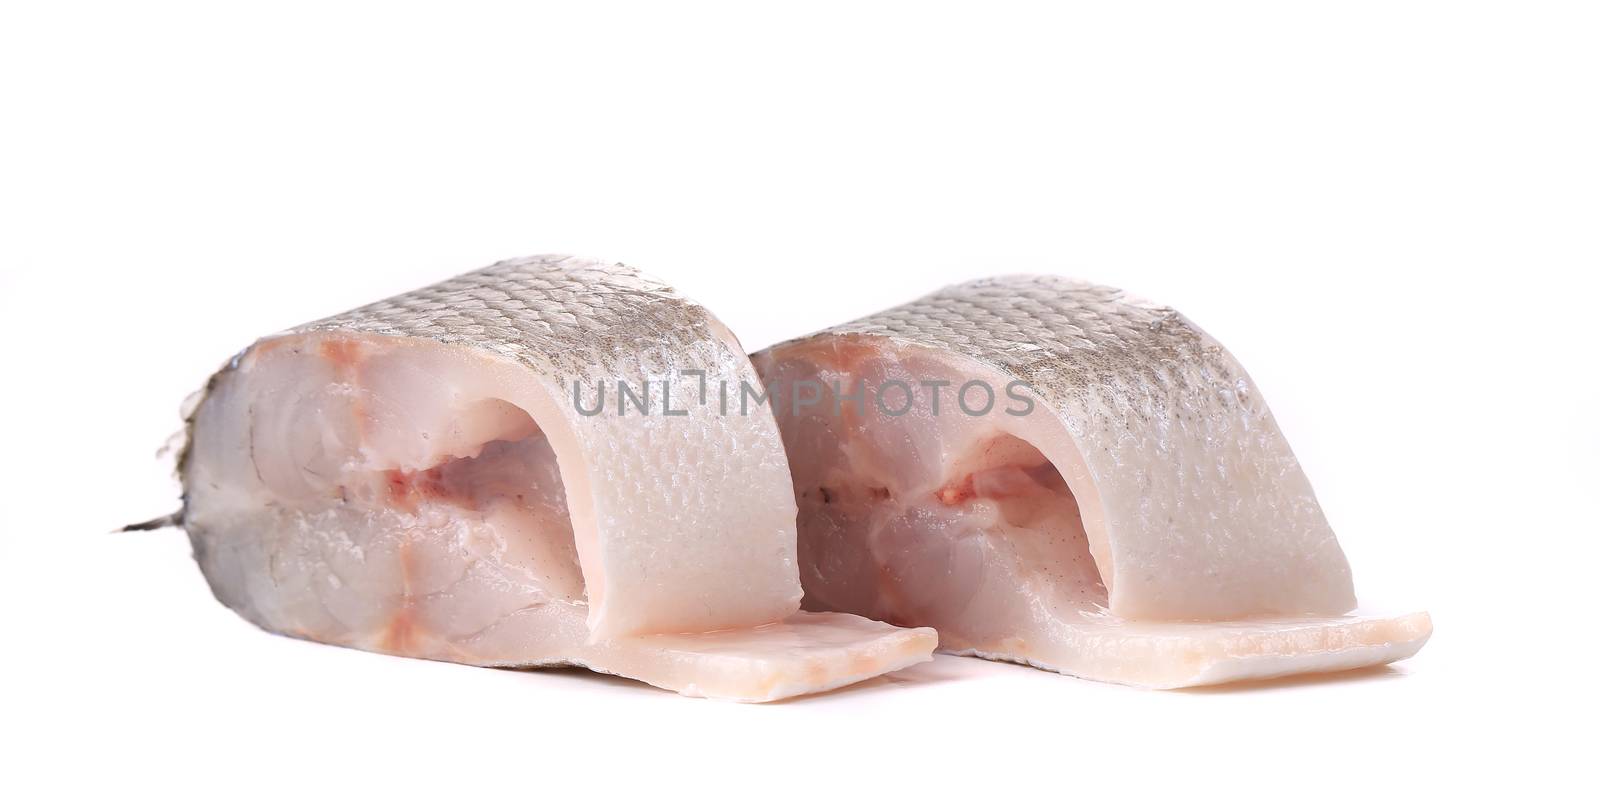 Two fresh steaks of seabass. Isolated on a white background.